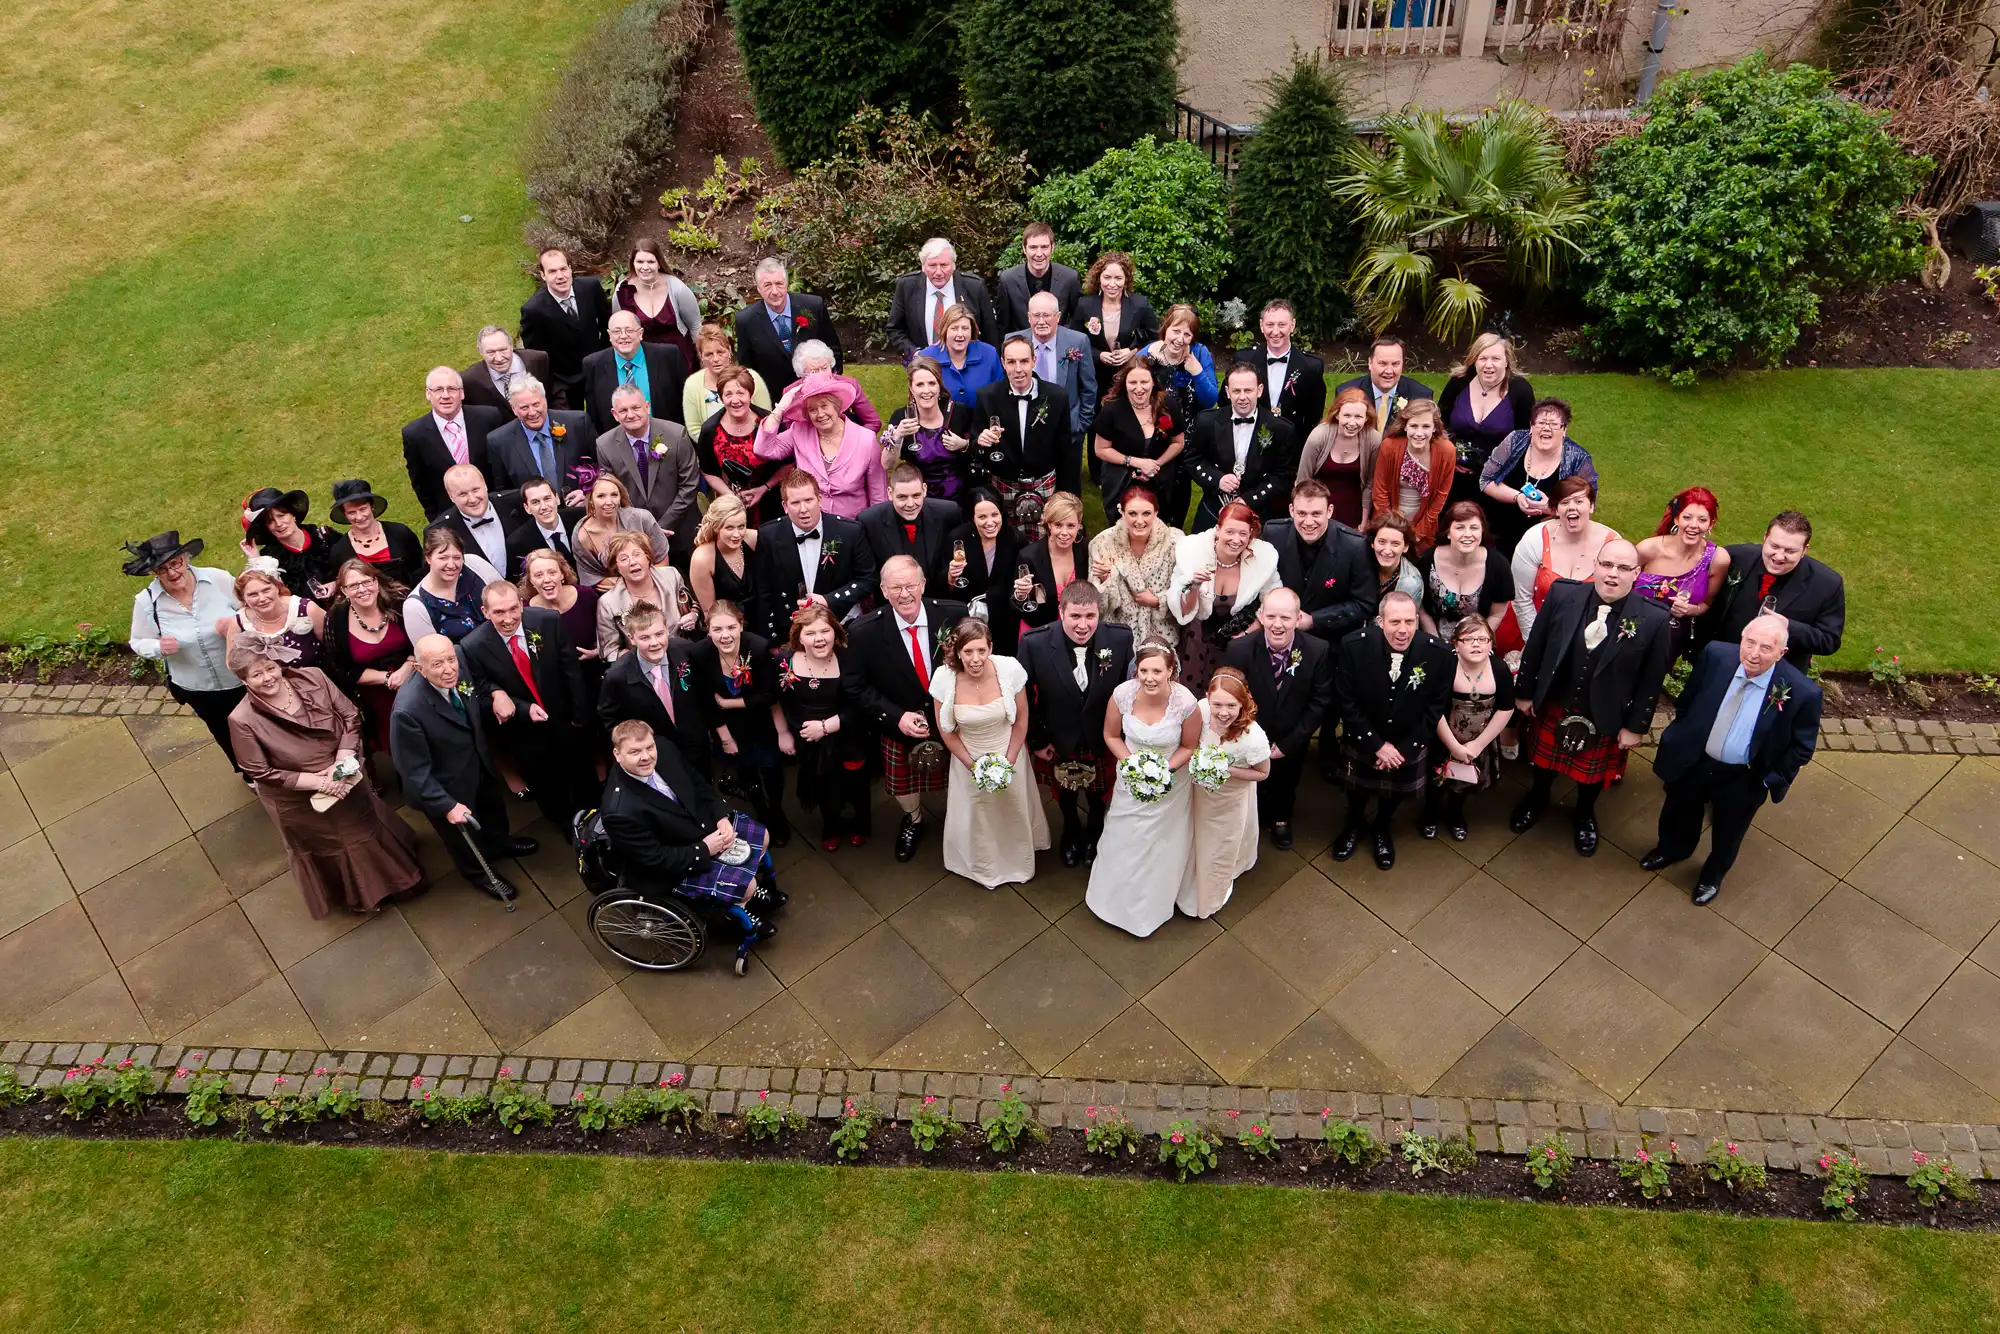 An aerial view of a large wedding group posing in a garden, featuring a bride and groom in the center surrounded by guests in formal attire.